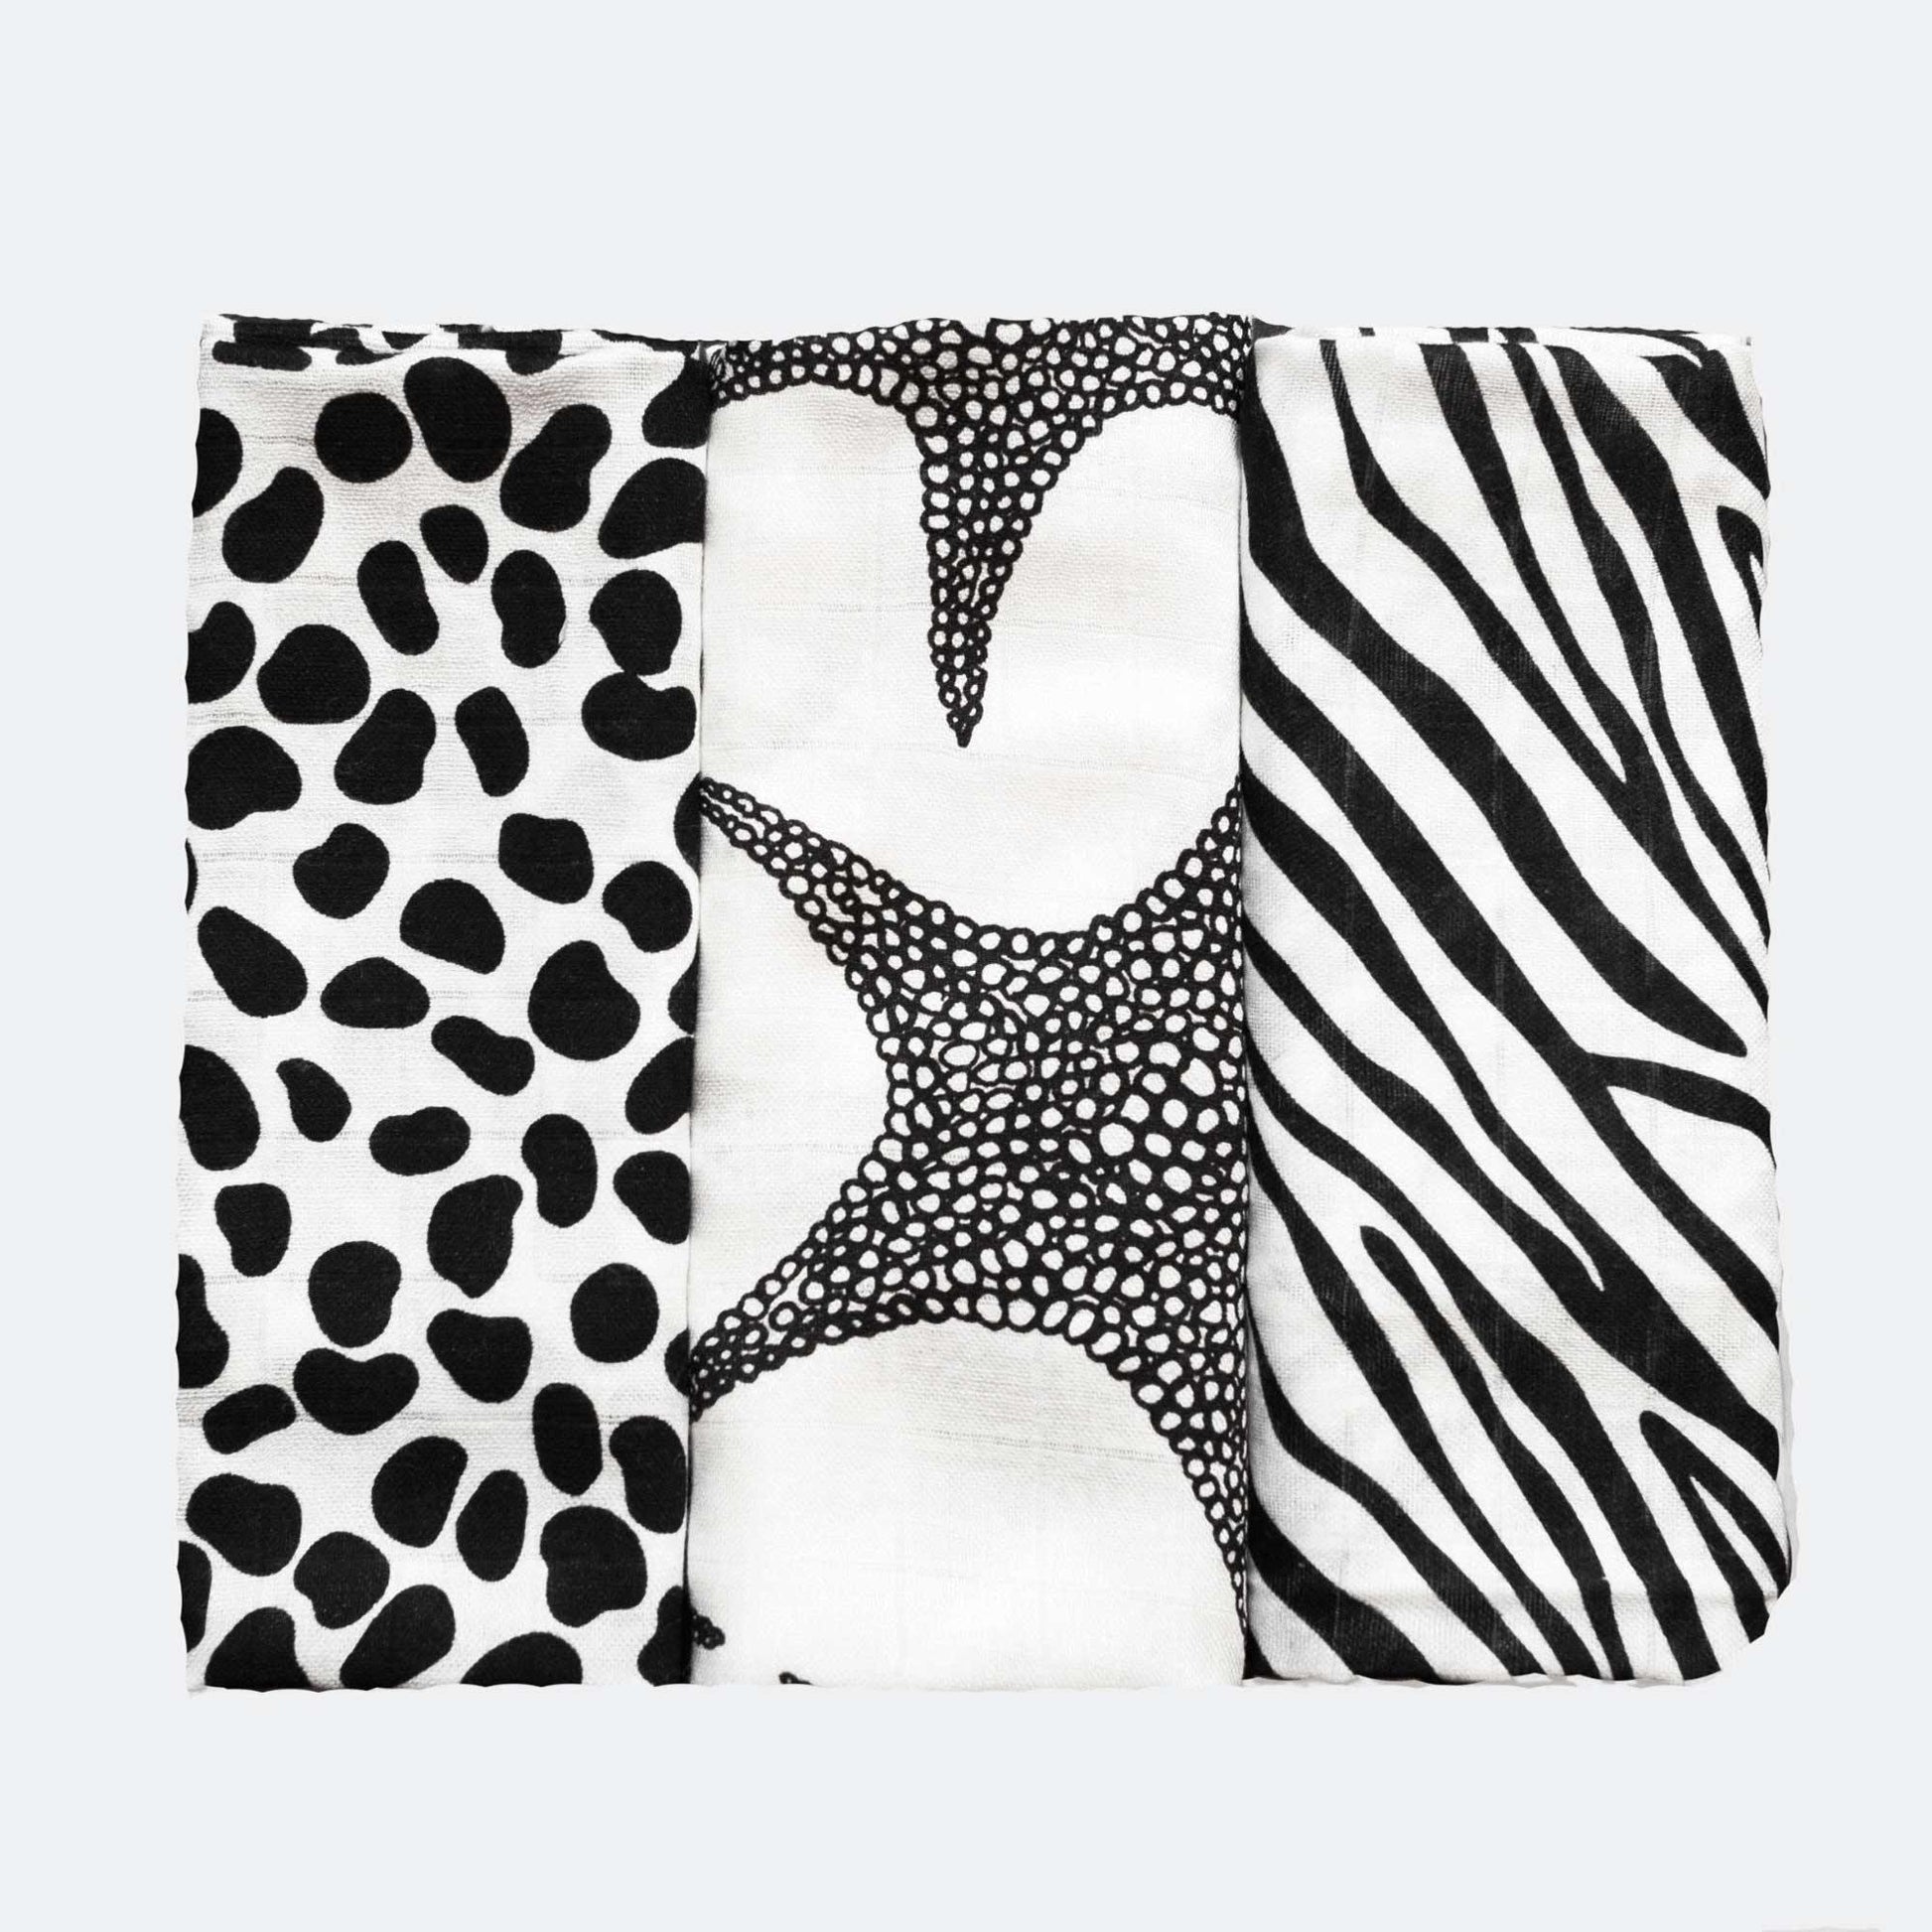 Keith Haring Pop Art Print Muslin Blanket 3-pack set in color Black & White animal print by Etta Loves for South Hous.